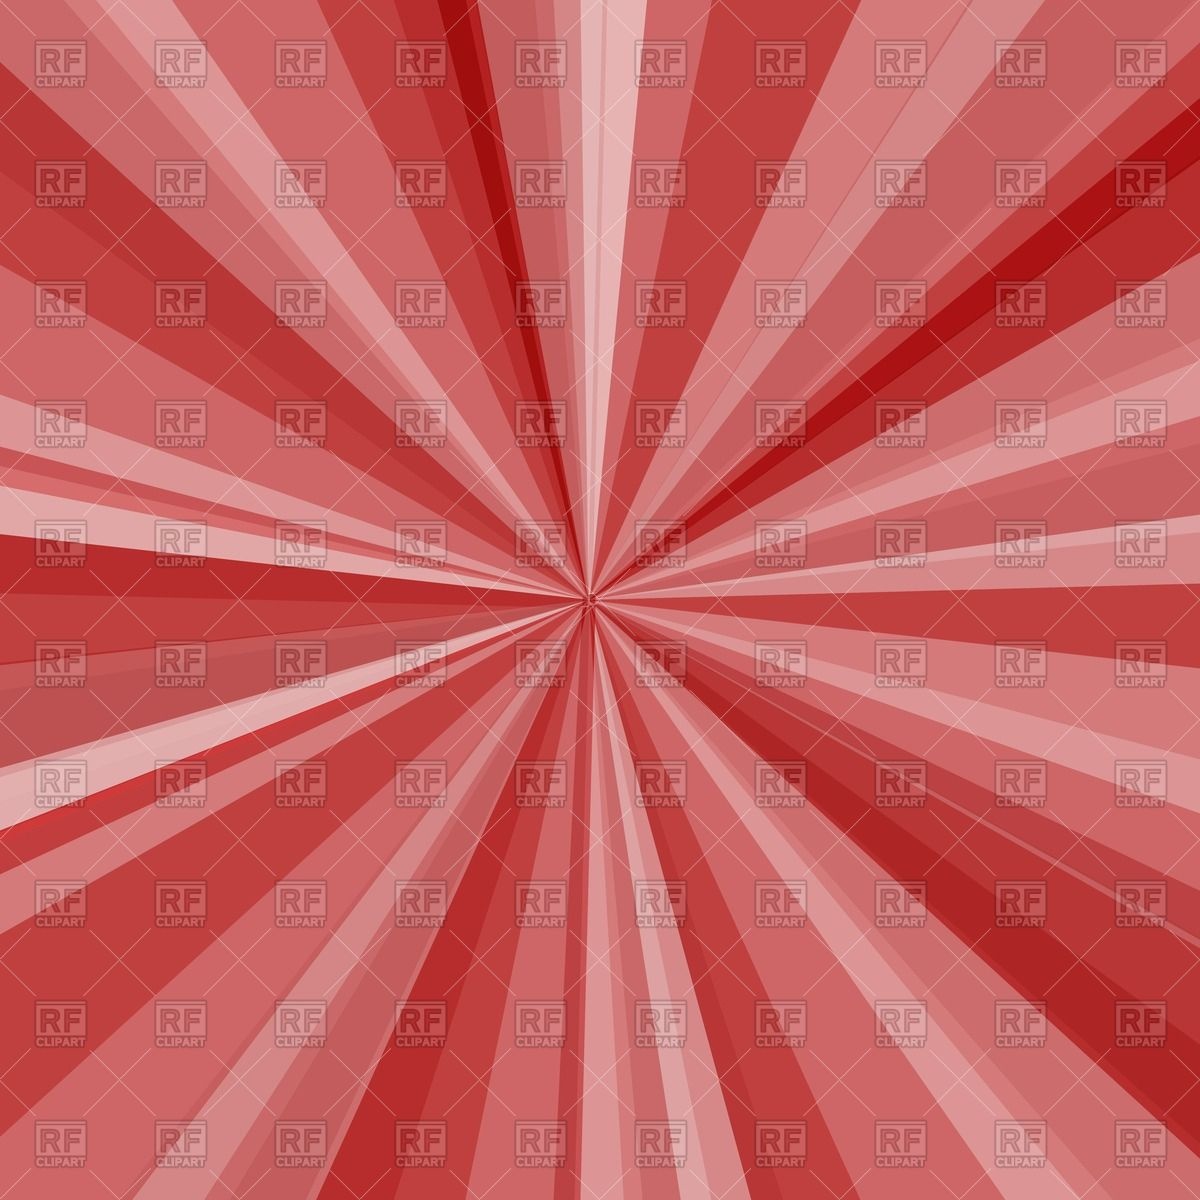 Retro Background With Red Rays 41116 Backgrounds Textures Abstract    